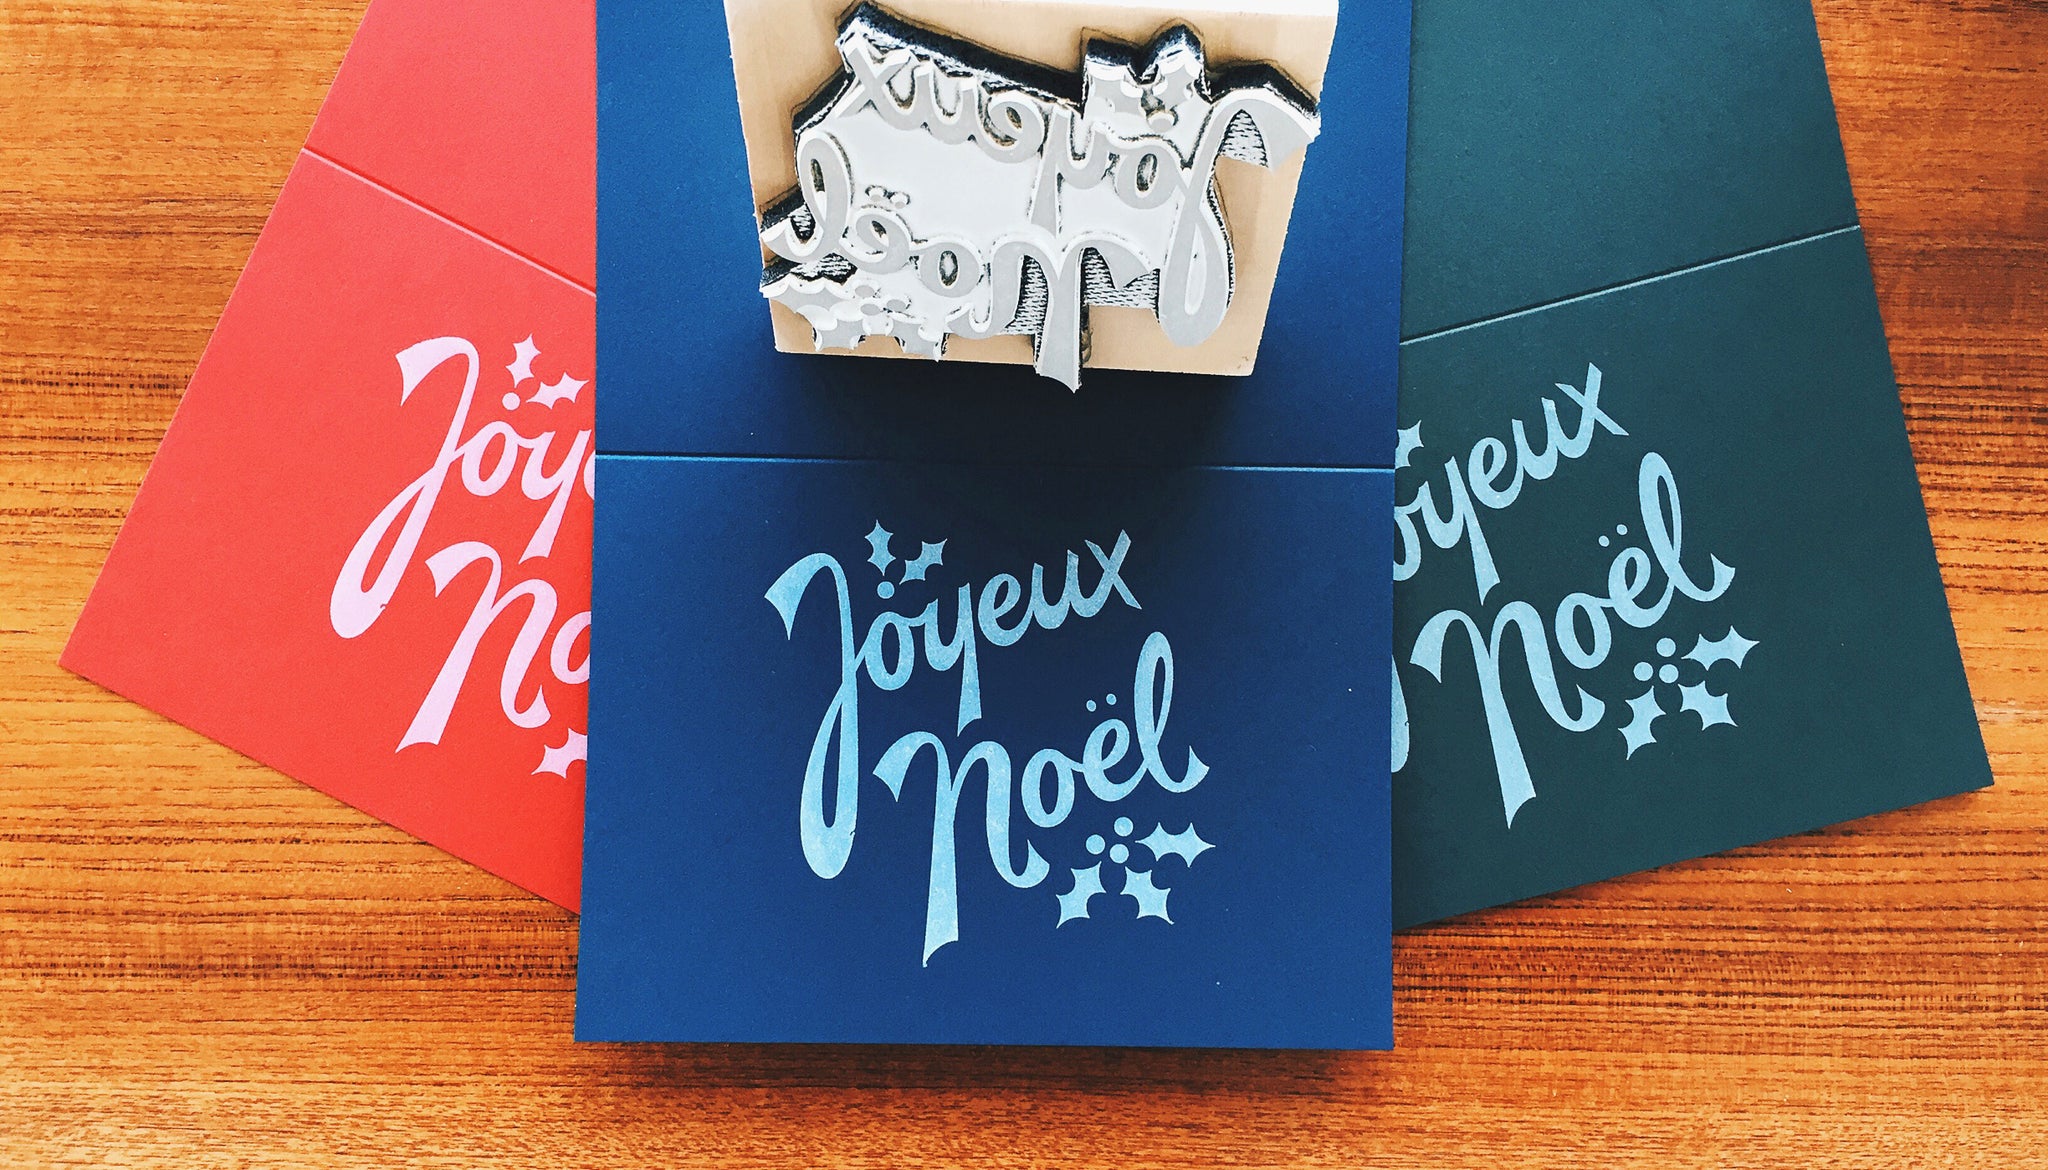 The Joyeux Noël greeting card comes in 3 decadent colors.